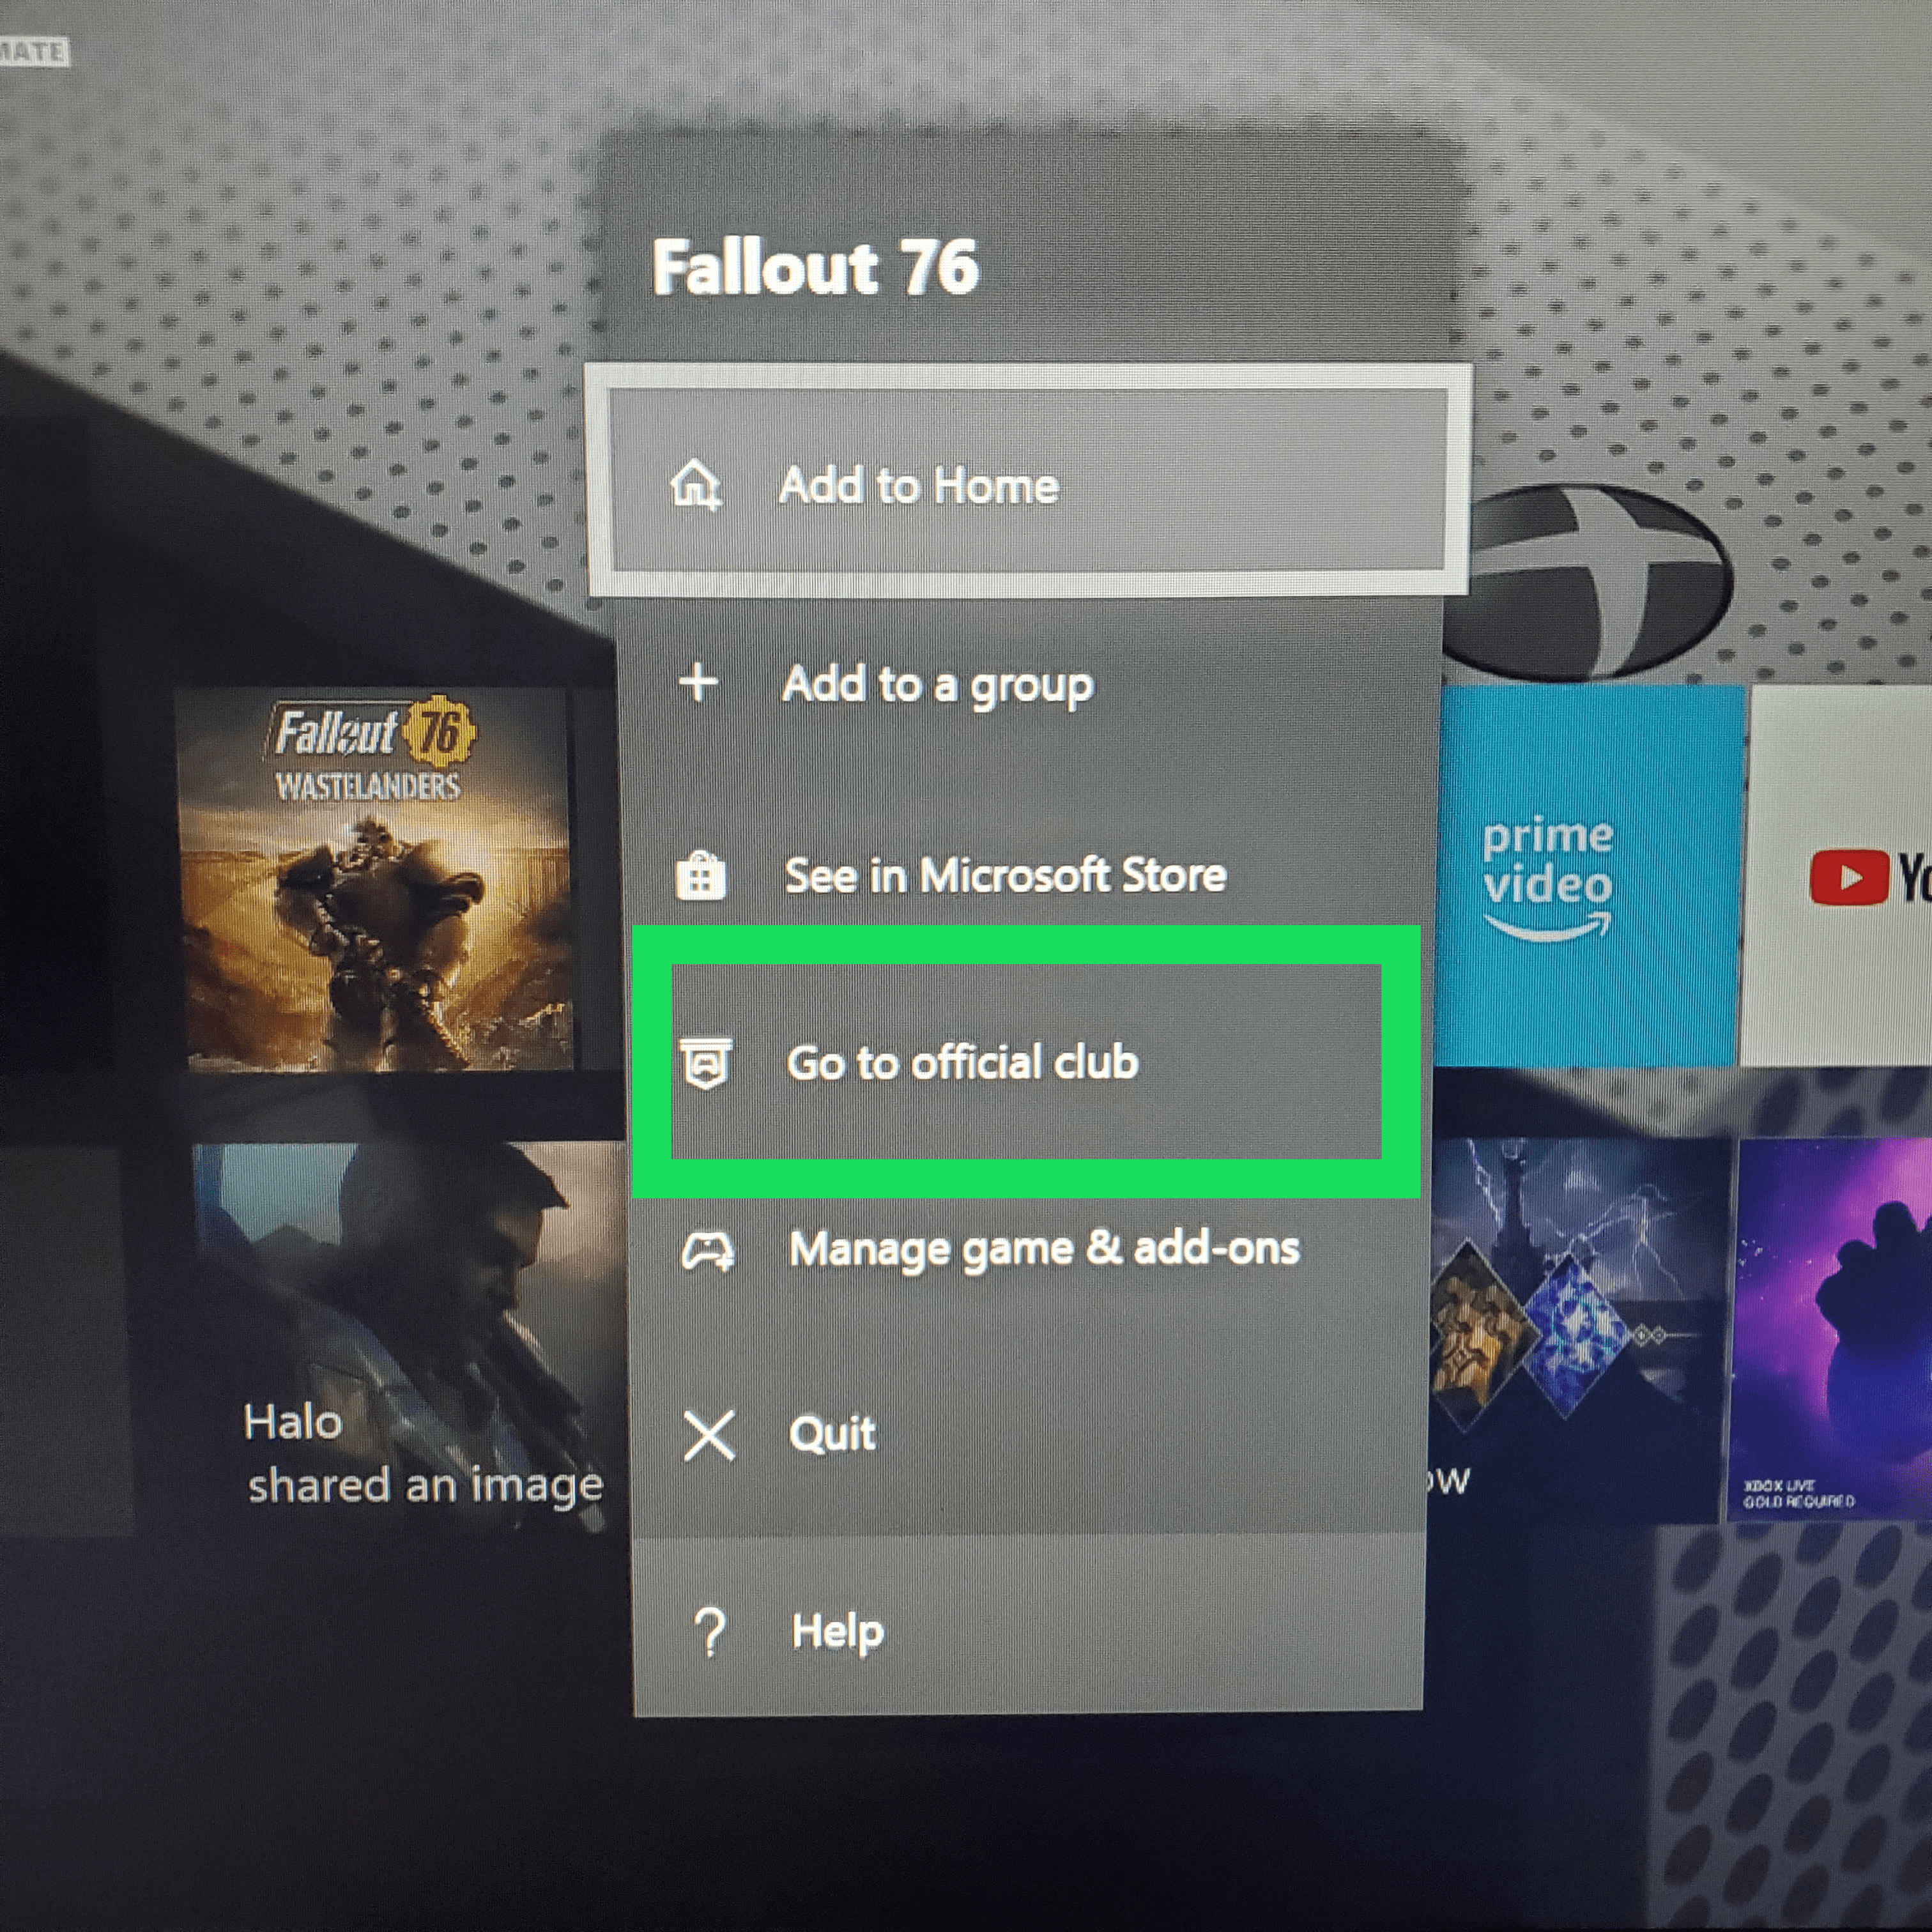 How to Check Time Played on Xbox?